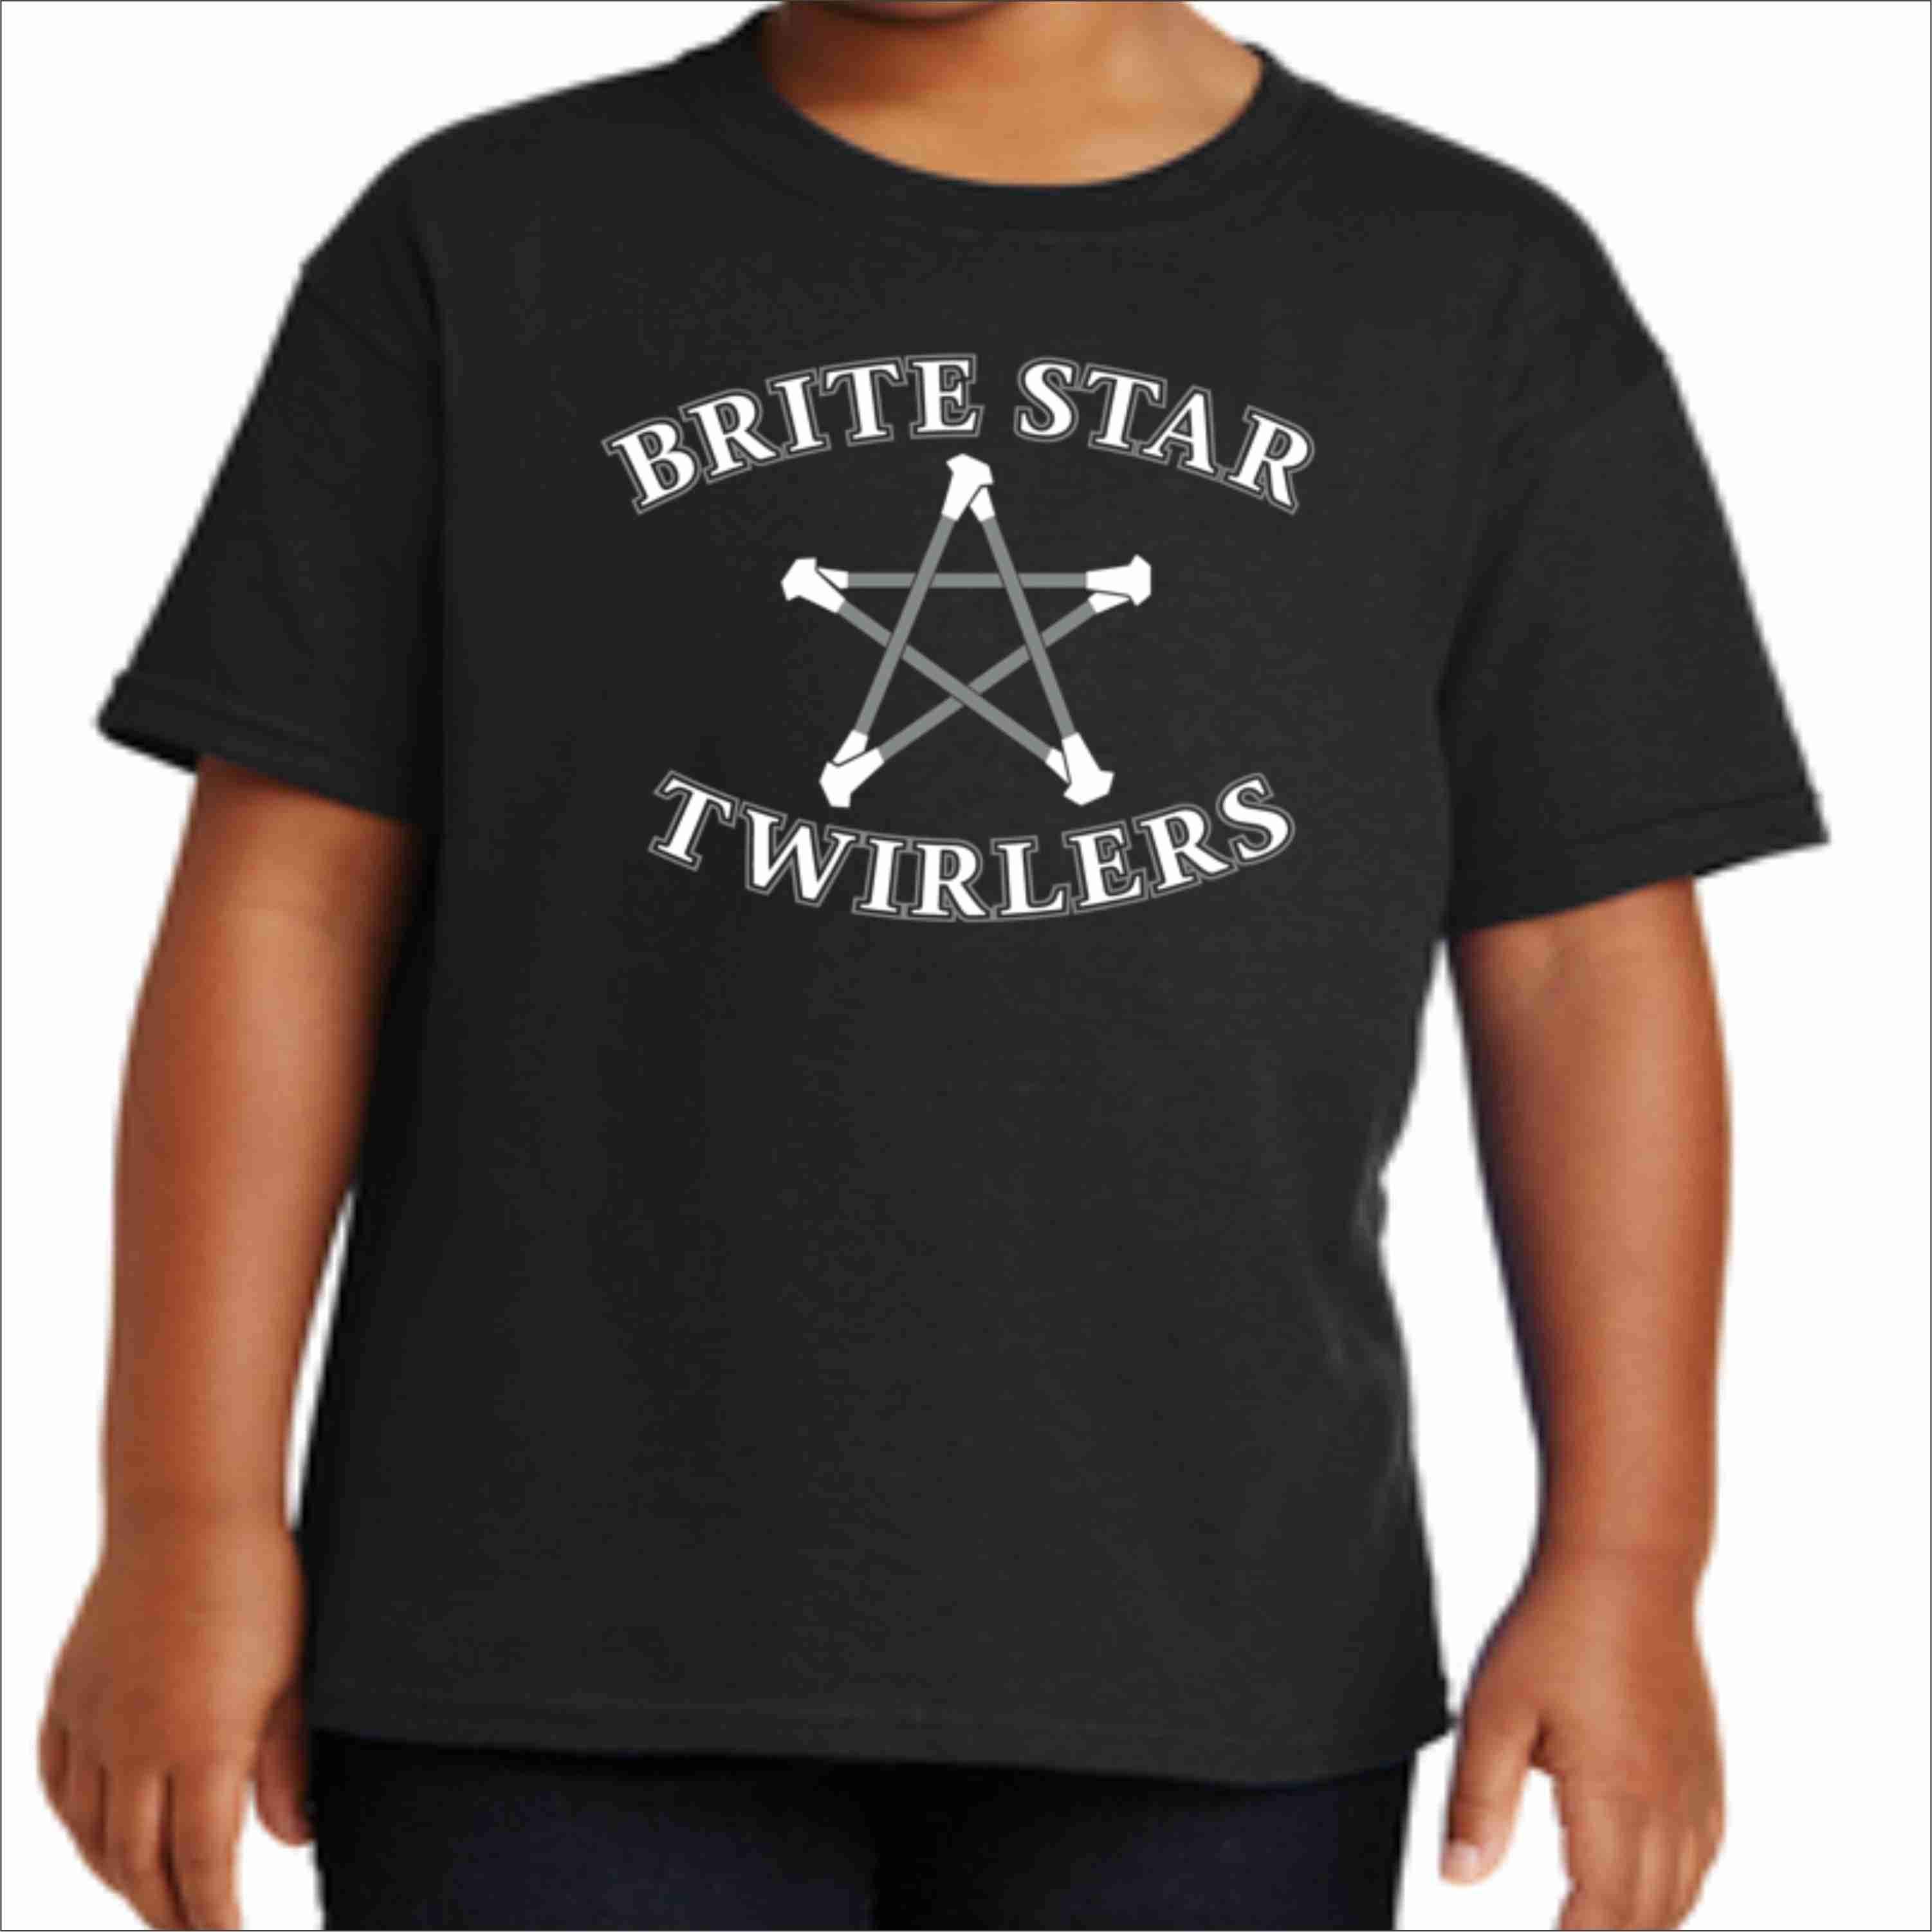 Brite Star Twirlers- Youth Short Sleeve Crew Neck Screen Printed Hoodie Beckys-Boutique.com Small Black 